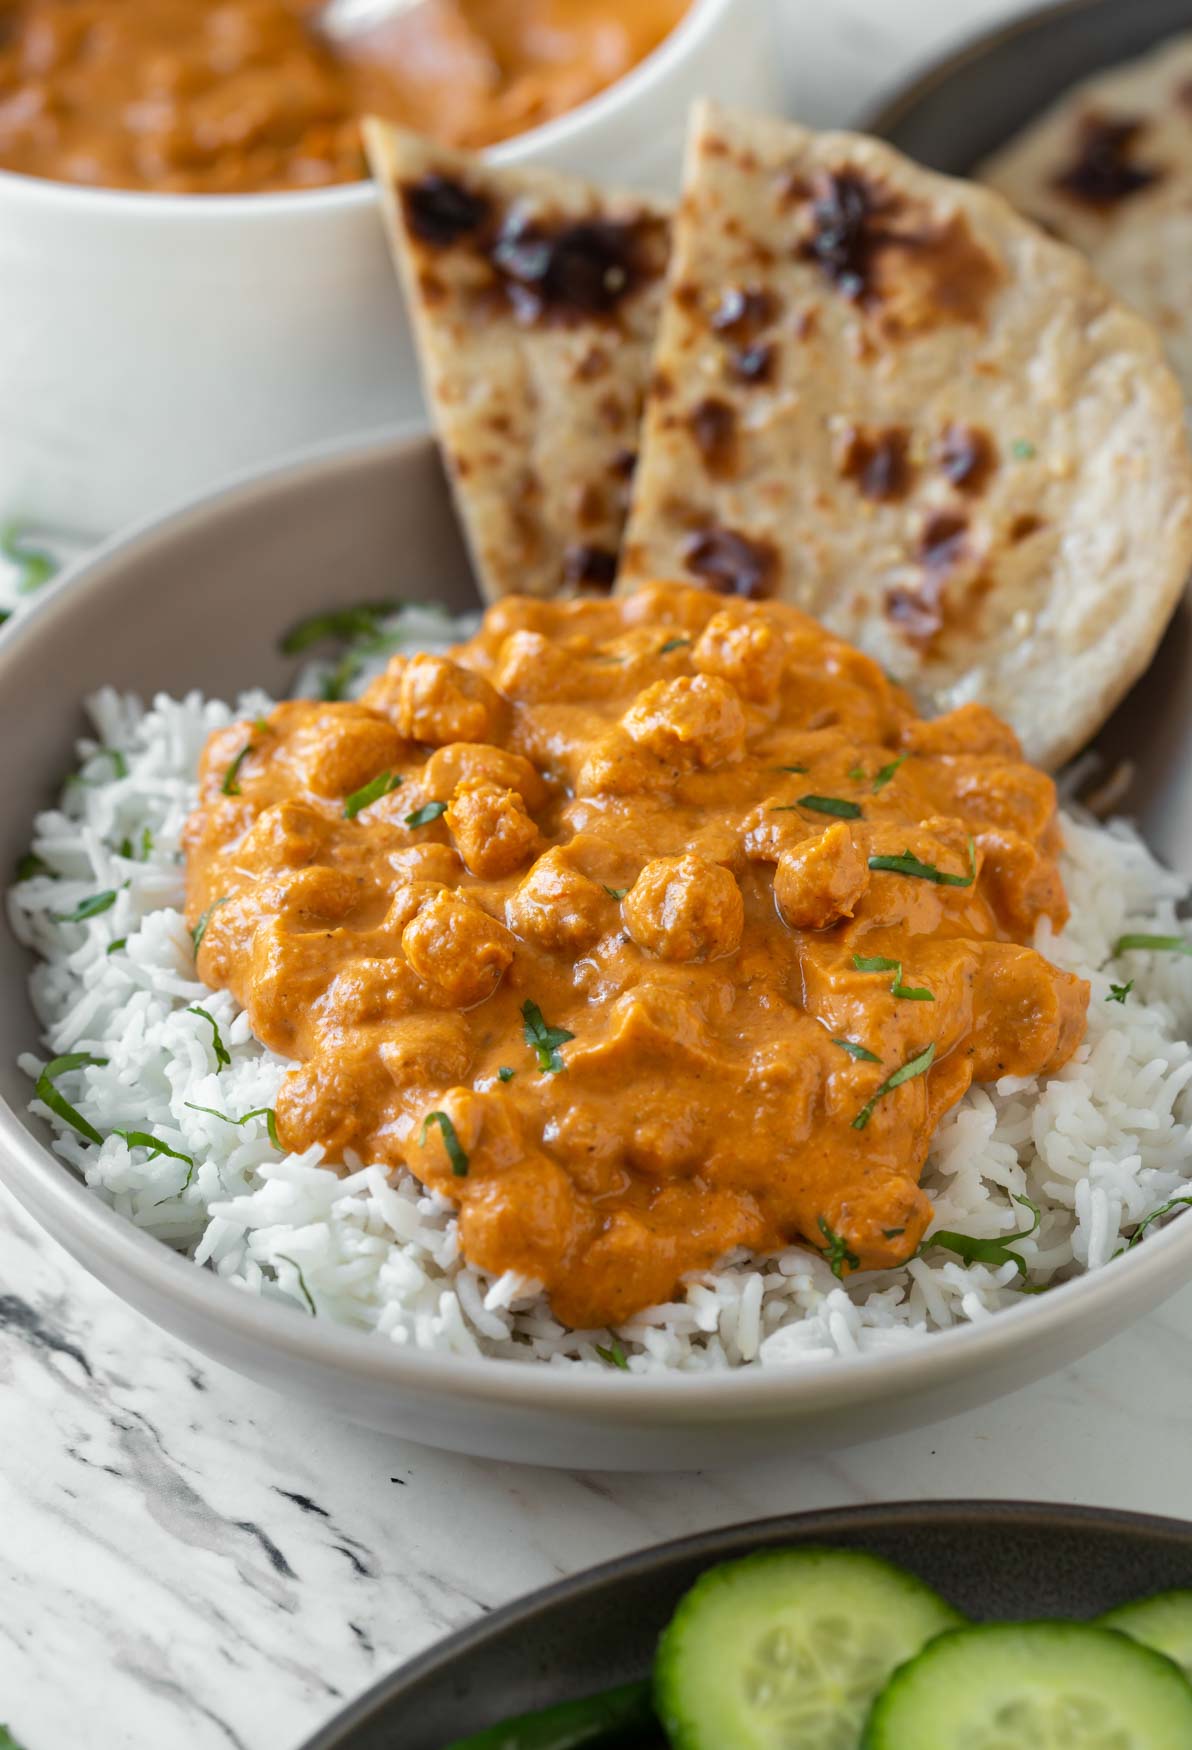 Enjoy authentic Indian flavors in this Healthy Chickpea Tikka Masala. Simple and easy vegetarian tikka masala recipe for a weeknight meal or to serve in a party. | #watchwhatueat #tikkamasala #chickpea #chickpeacurry #Indiancooking